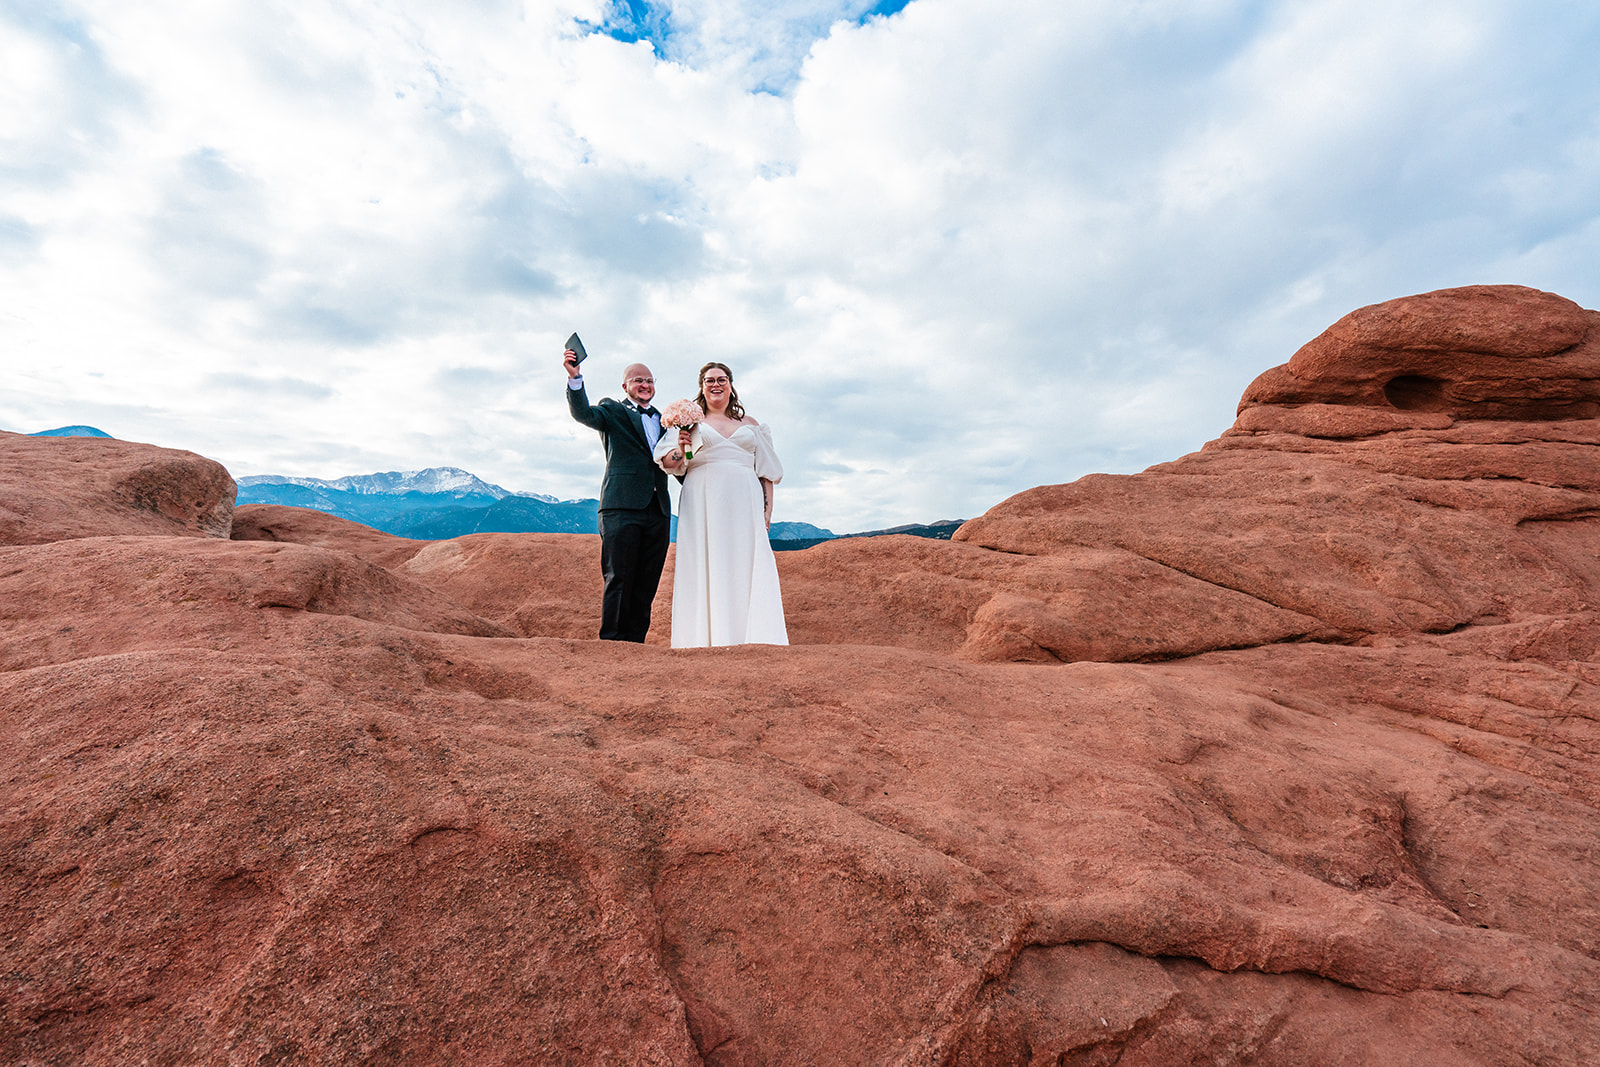 A bride and groom celebrate their marriage and raise their hands beneath a cloudy sky during their Garden of the Gods elopement at the High Point ceremony location.